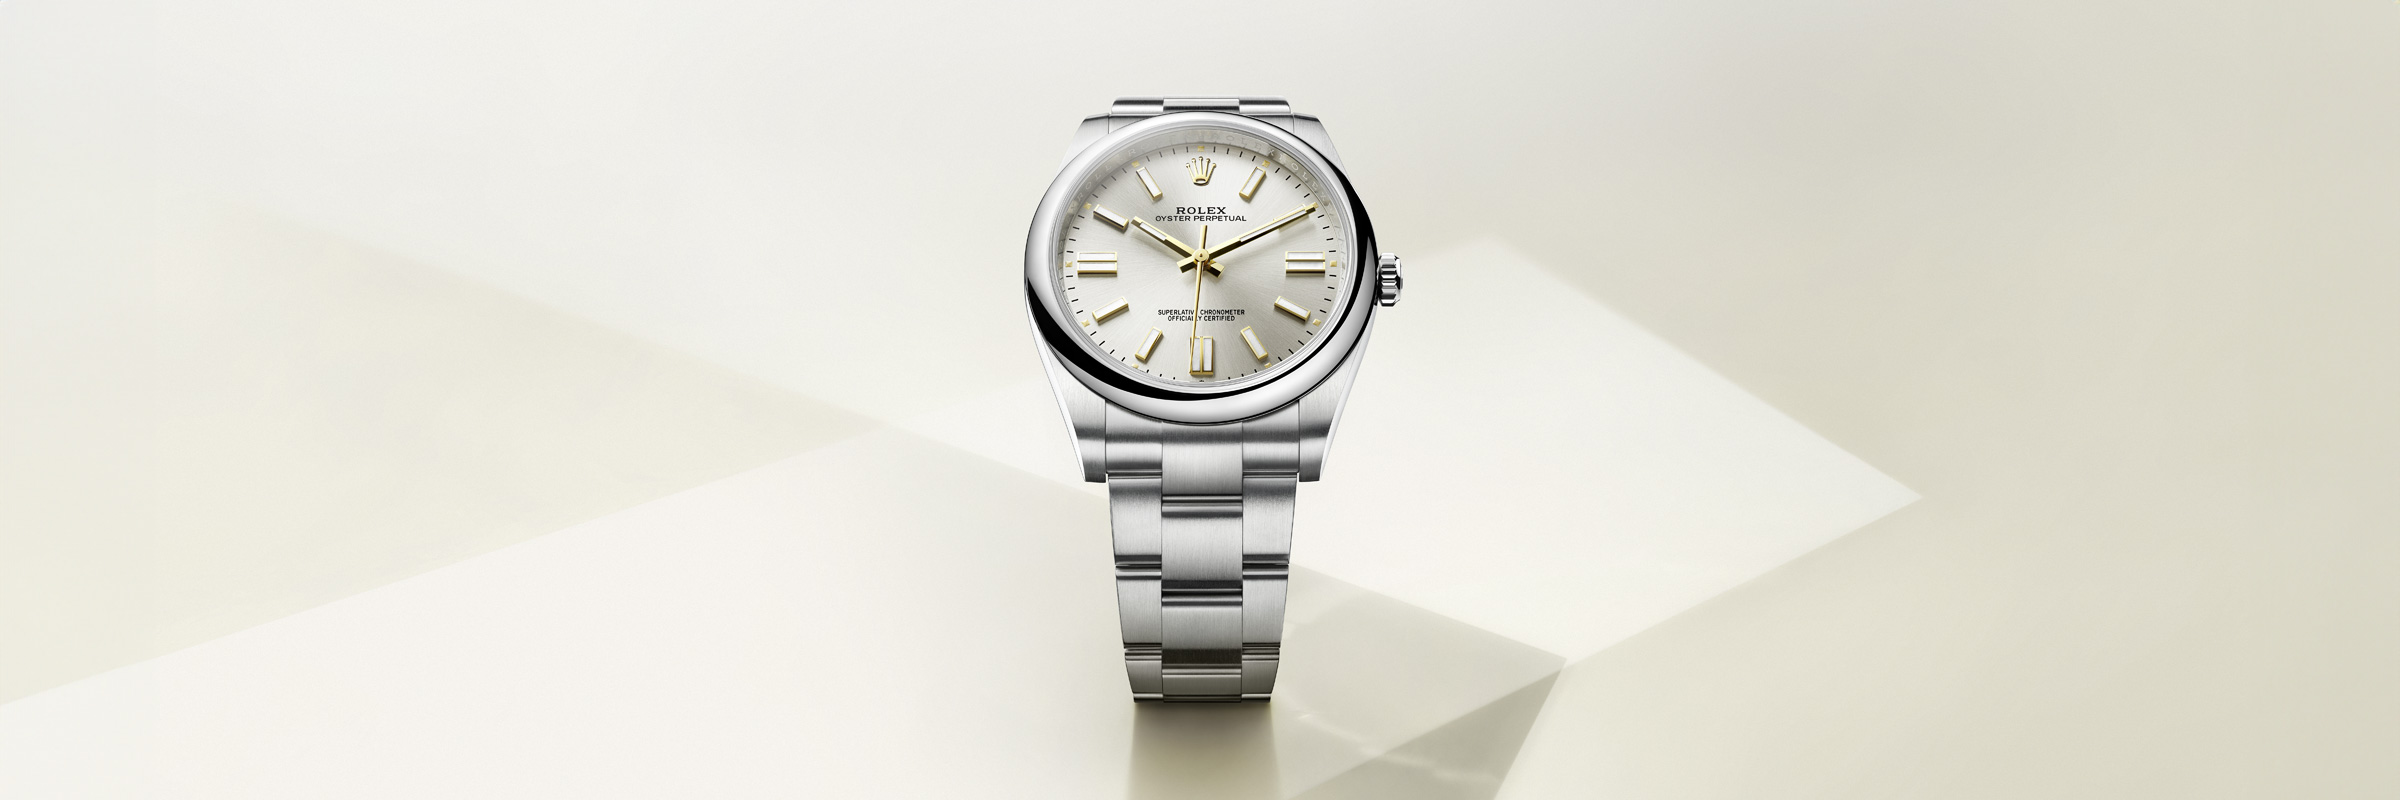 Oyster Perpetual watches